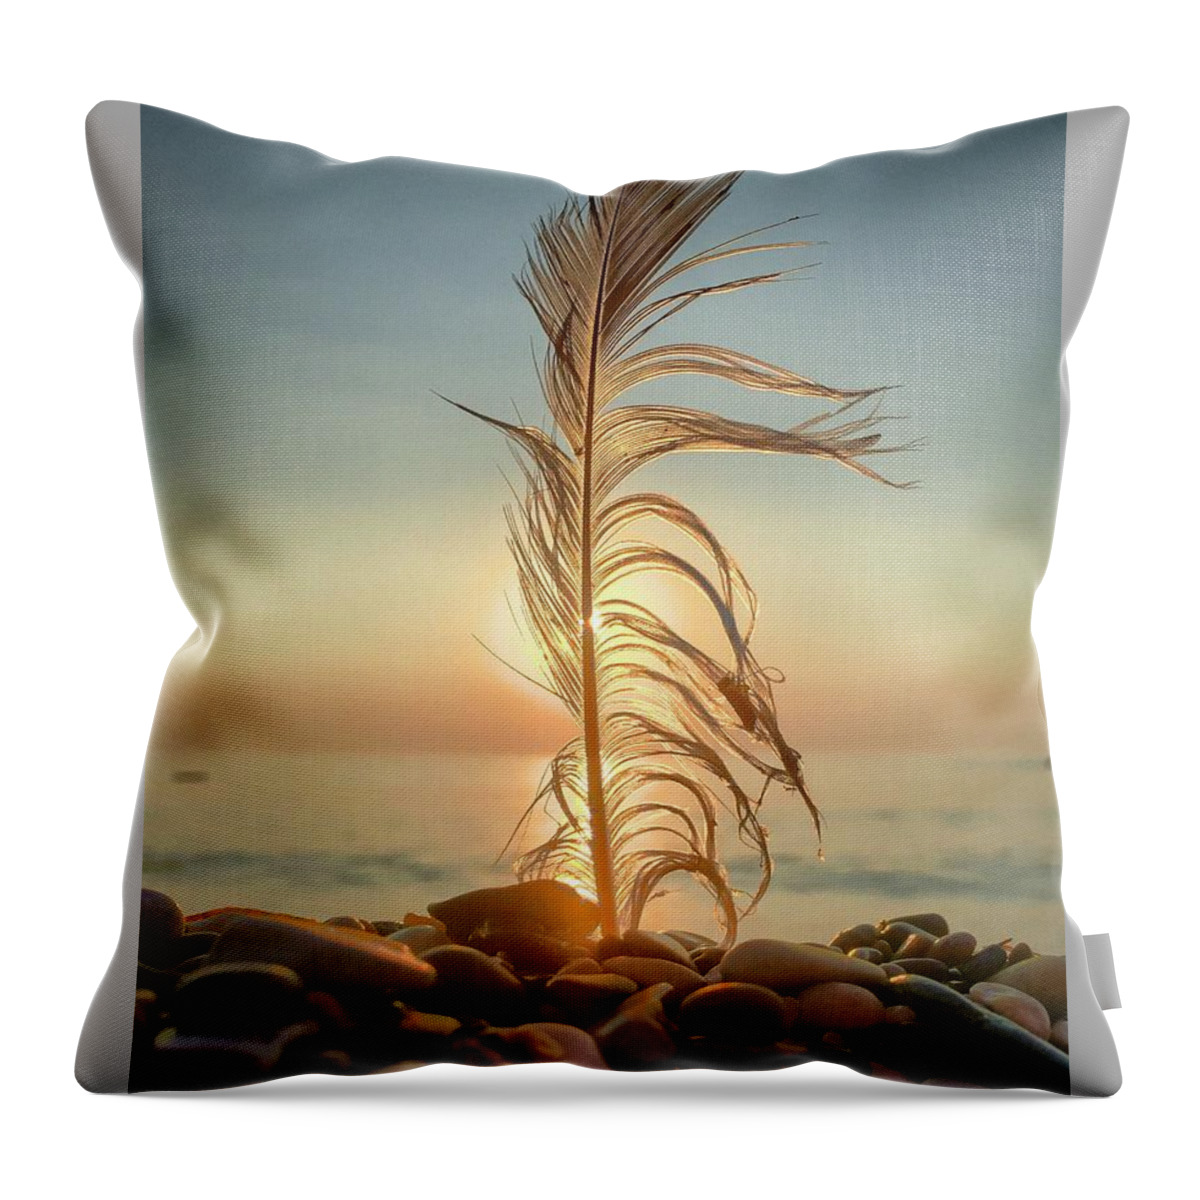 Feather Throw Pillow featuring the photograph Lights by Terri Hart-Ellis